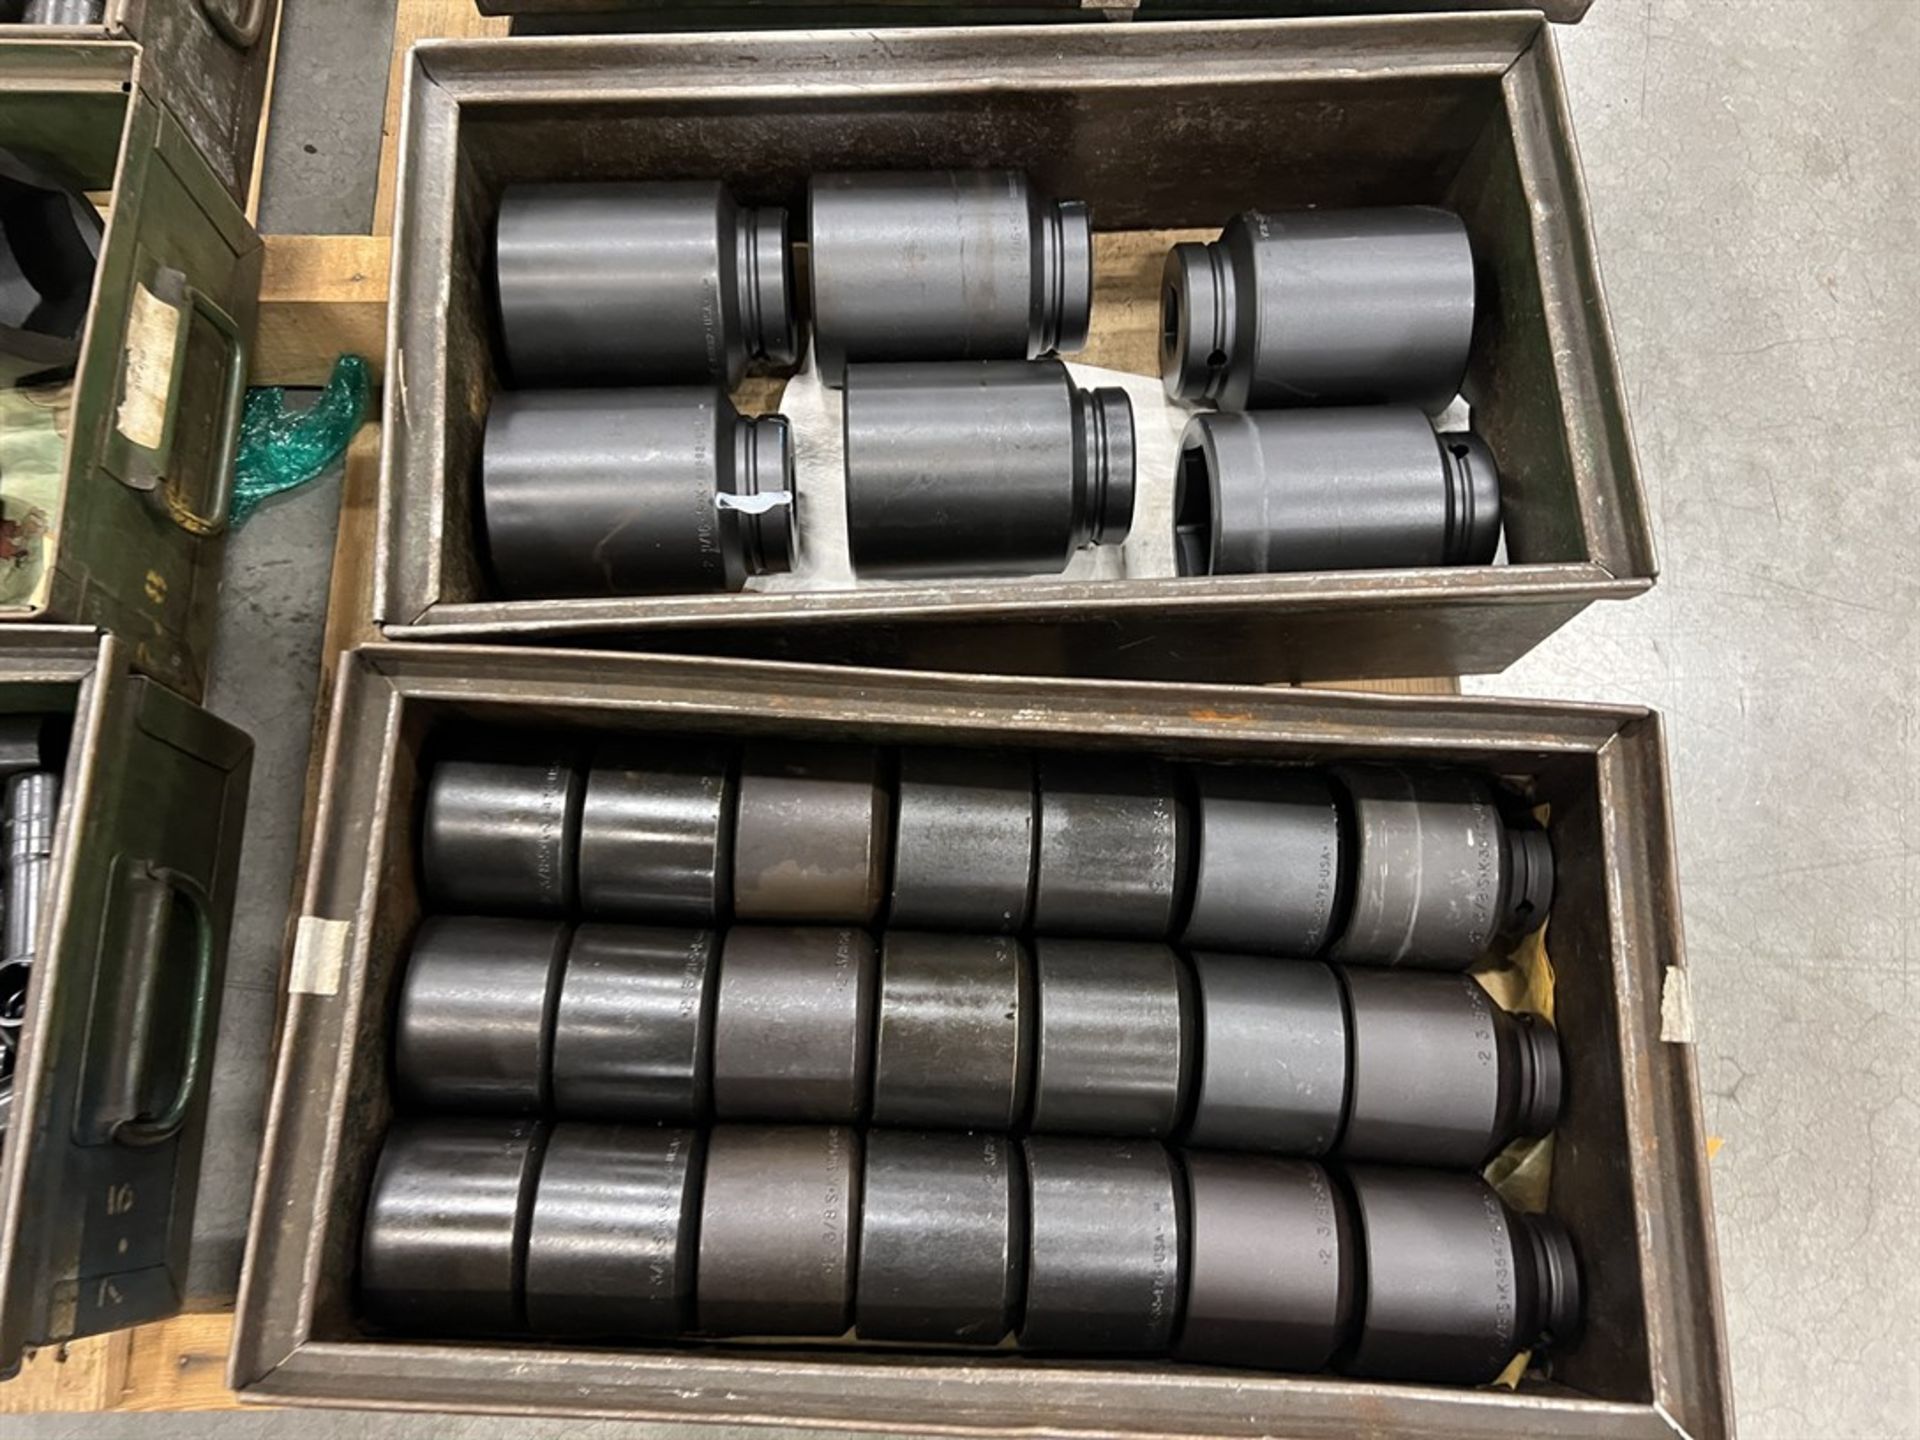 Pallet of 1" Drive Impact Sockets from 1-1/8" to 3-3/8" - Image 2 of 5